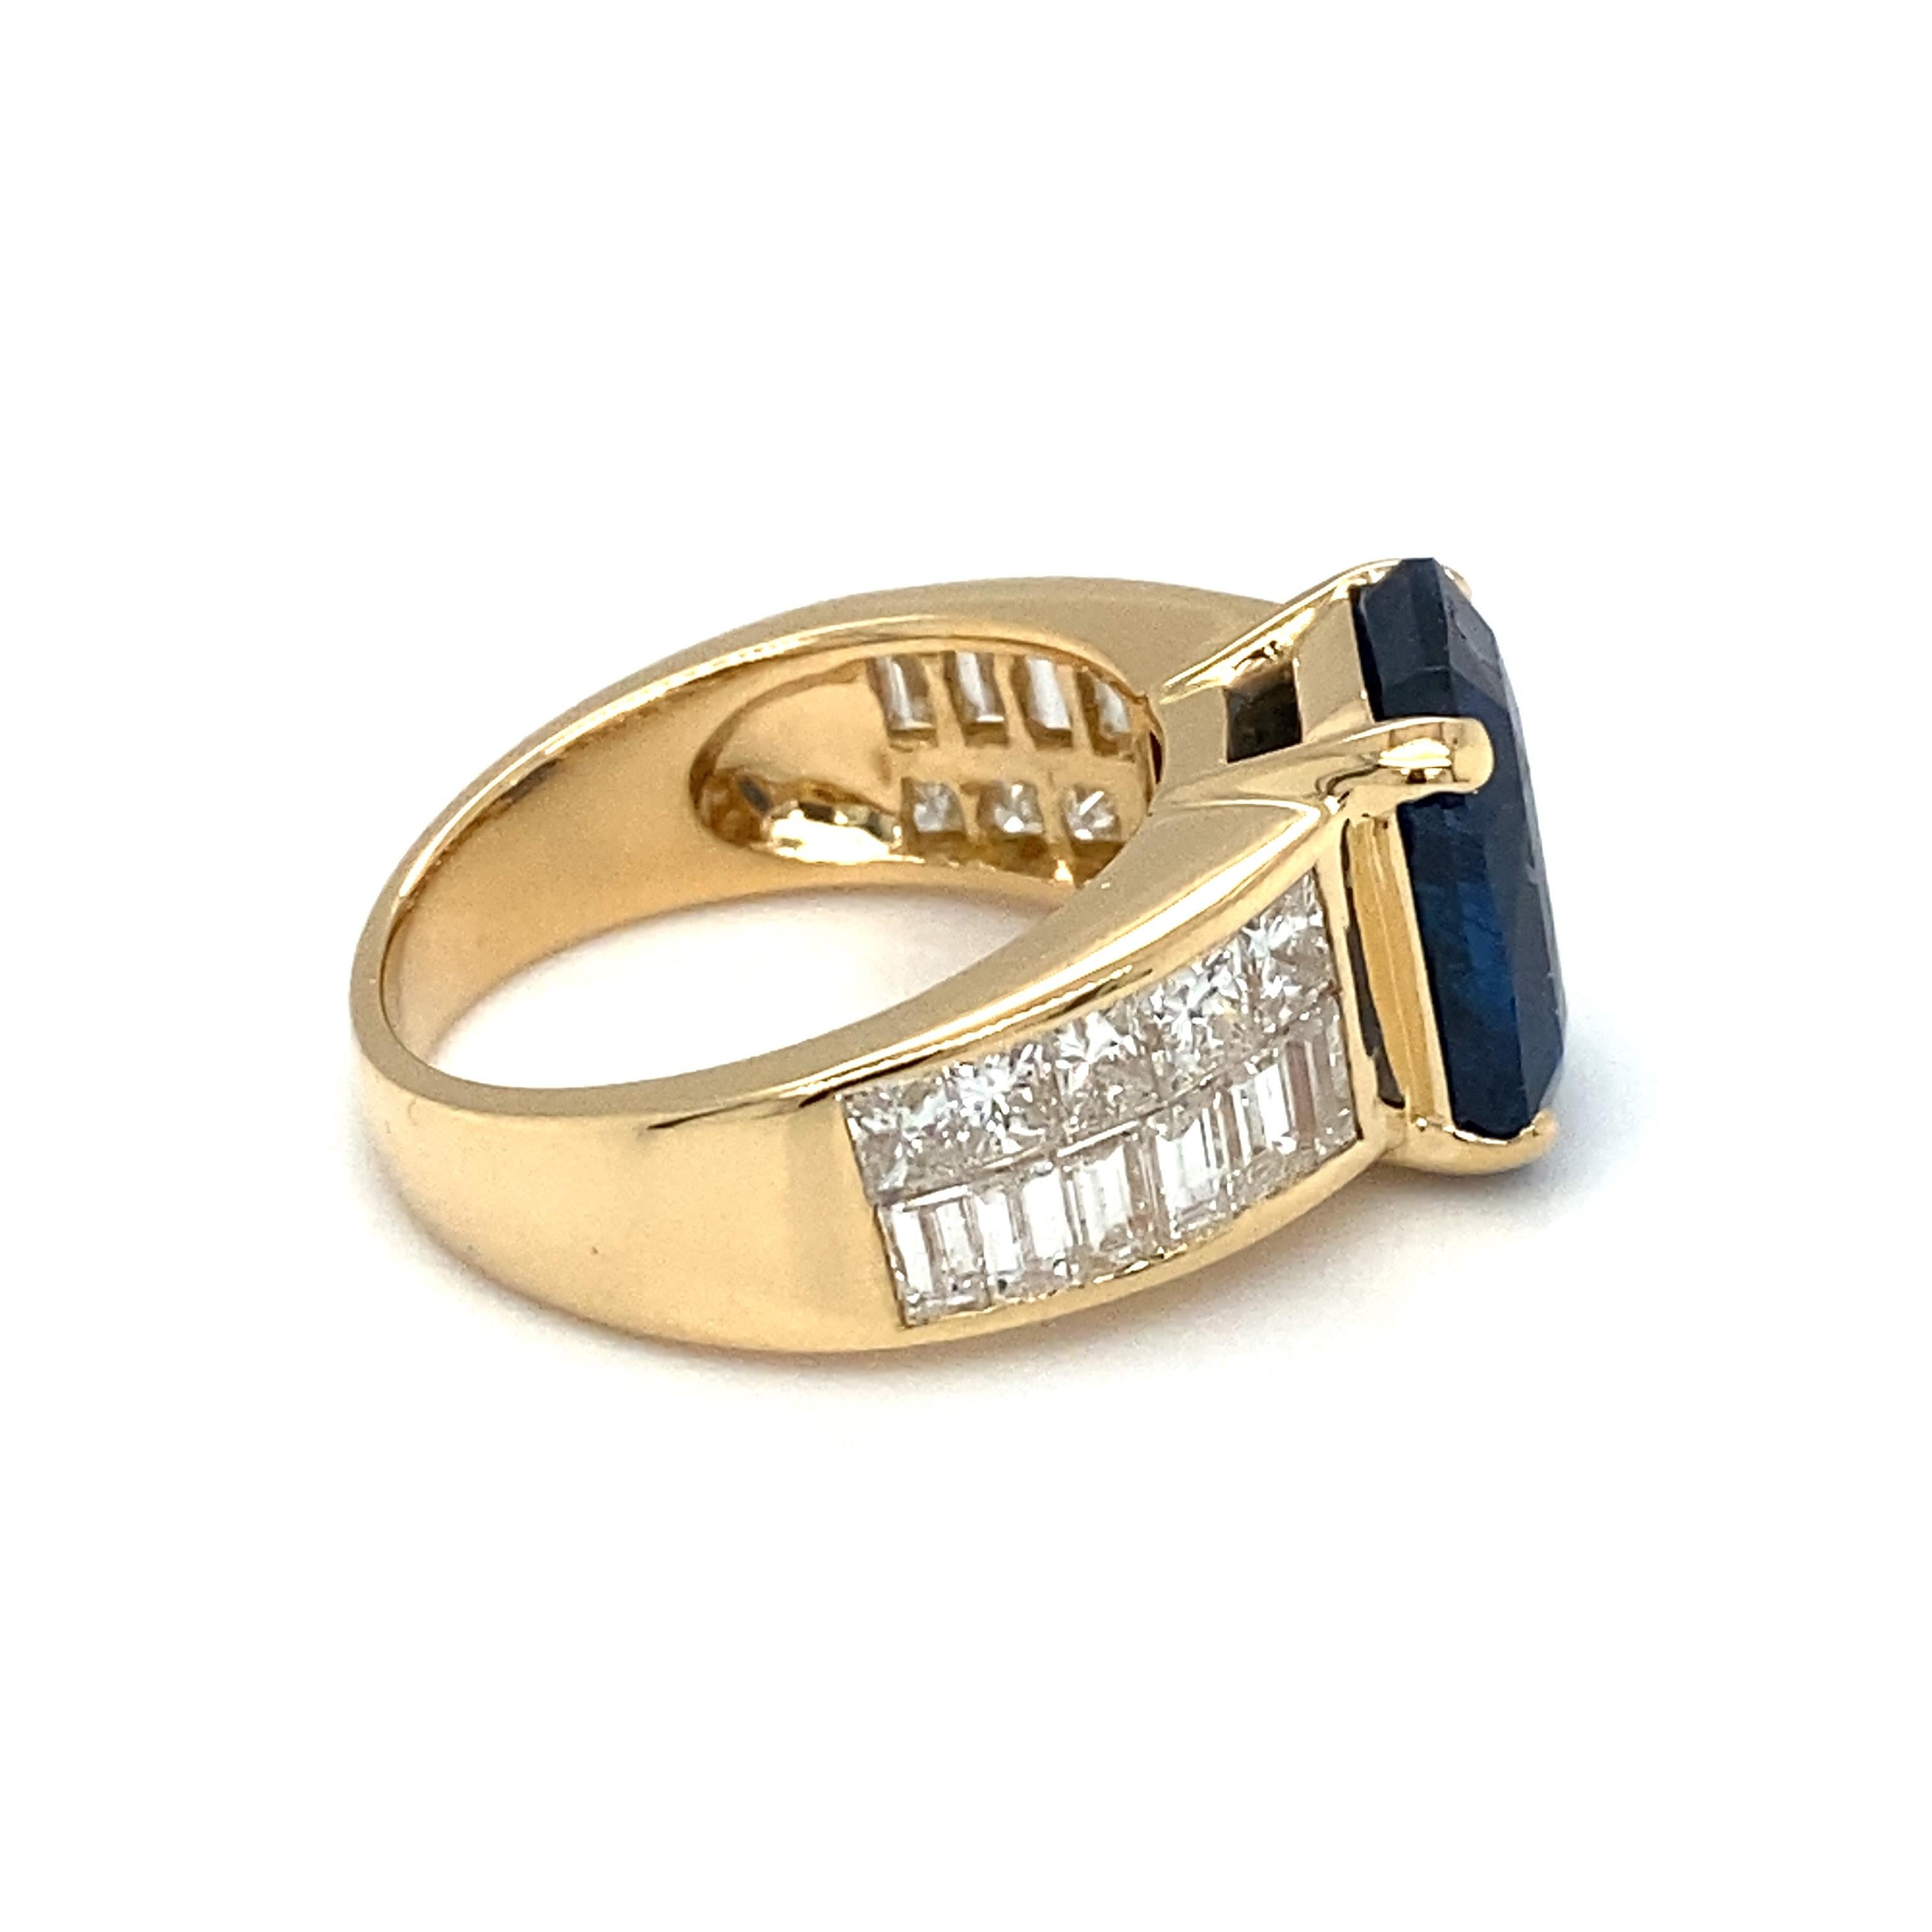 GIA Certified 6.35 Carat Emerald Cut Sapphire Diamond Cocktail Ring in 18K Gold For Sale 1